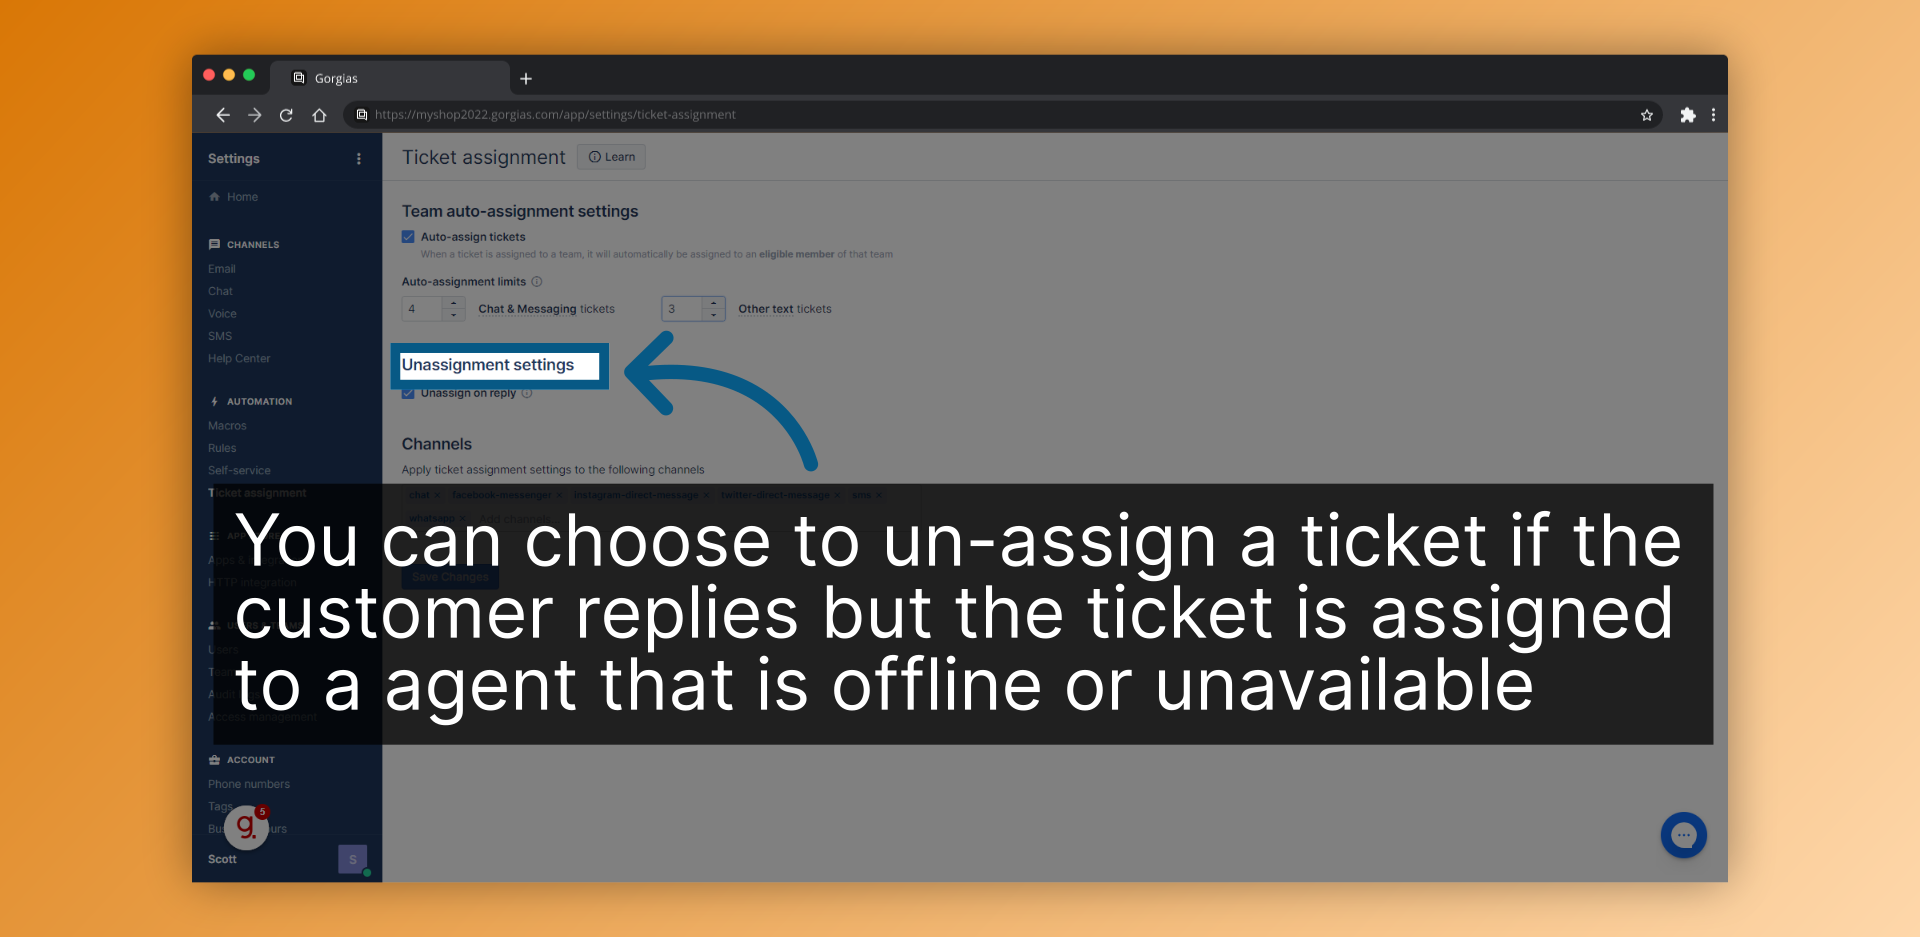 You can choose to un-assign a ticket if the customer replies but the ticket is assigned to a agent that is offline or unavailable